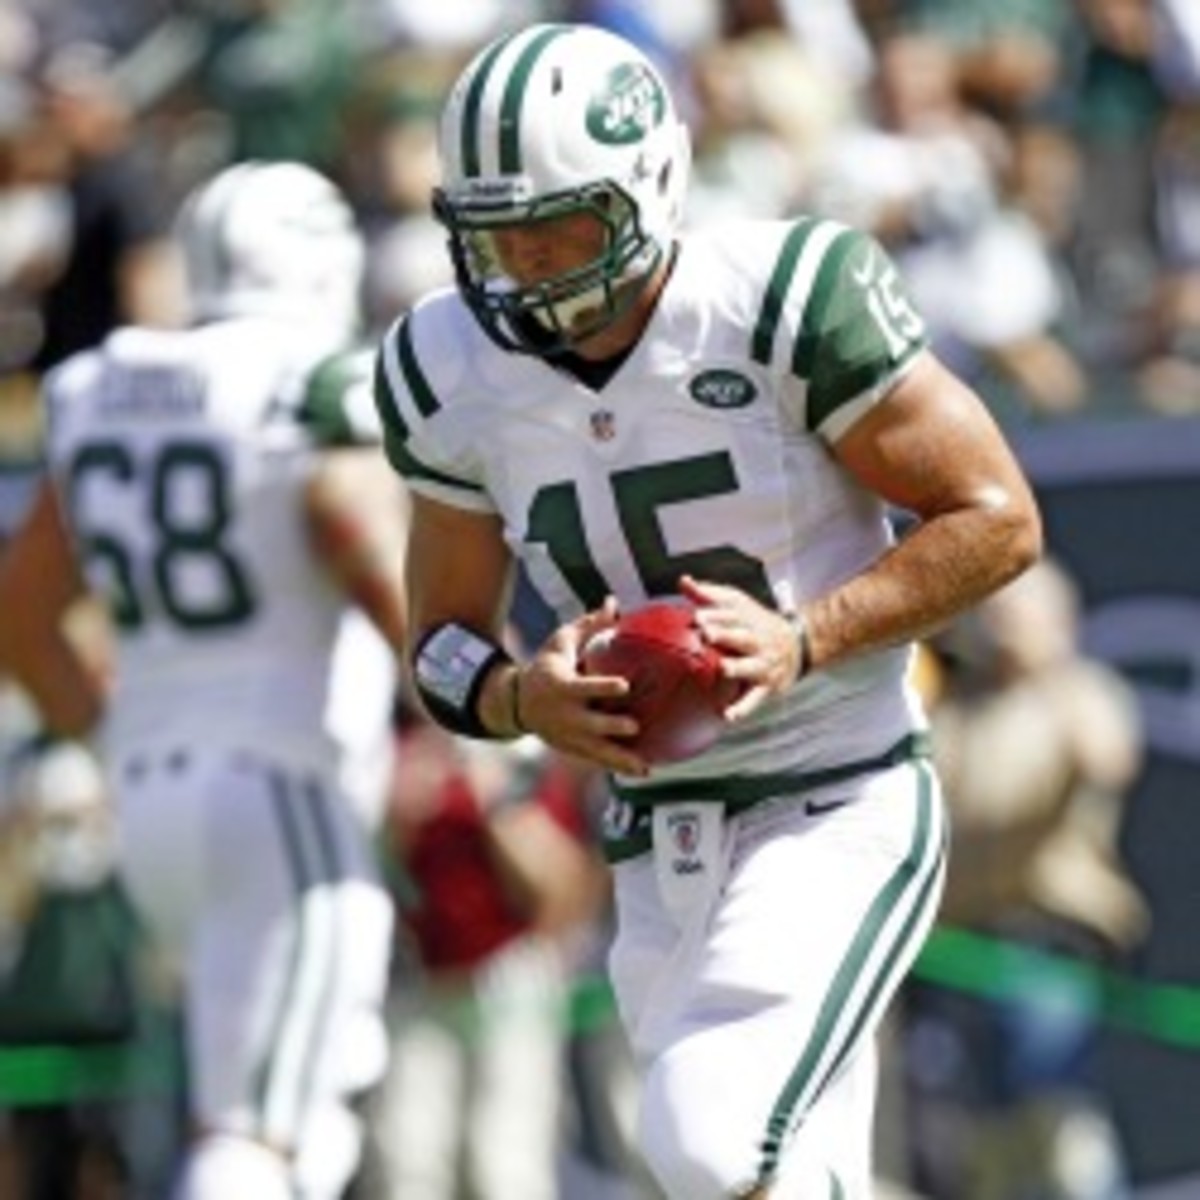 Jets backup quarterback Tim Tebow will reportedly end up in Jacksonville next season. (Jeff Zelevansky/Getty Images)